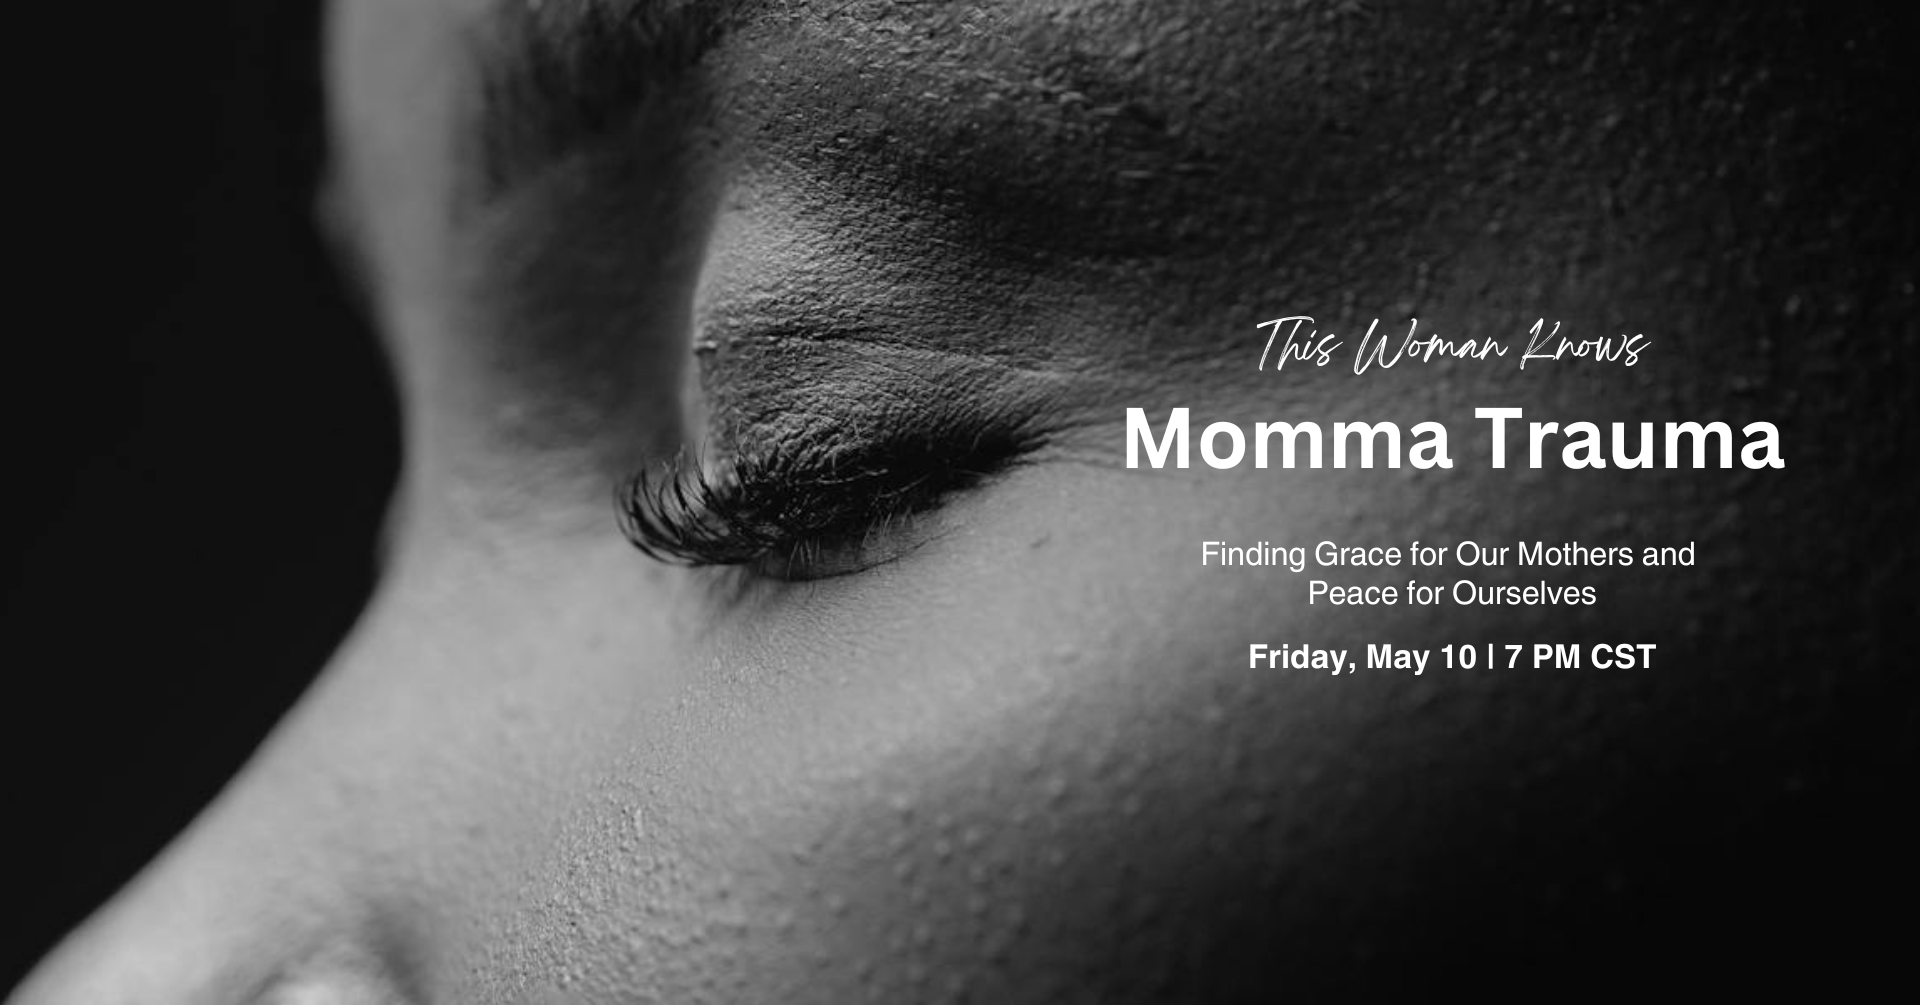 Momma Trauma: Finding Grace for Our Mothers and Peace For Ourselves